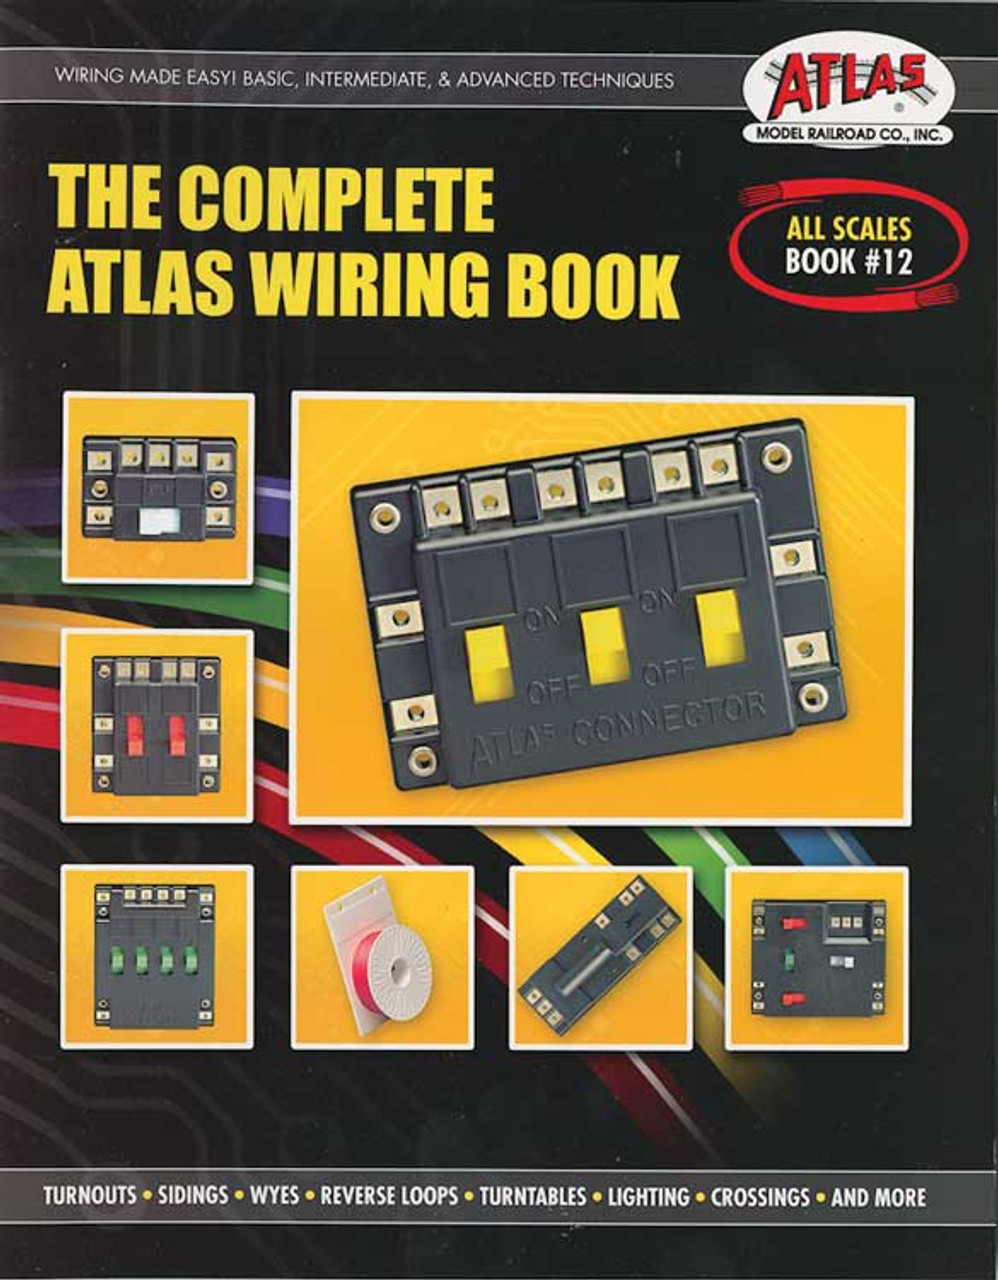 The Complete Atlas Wiring Book